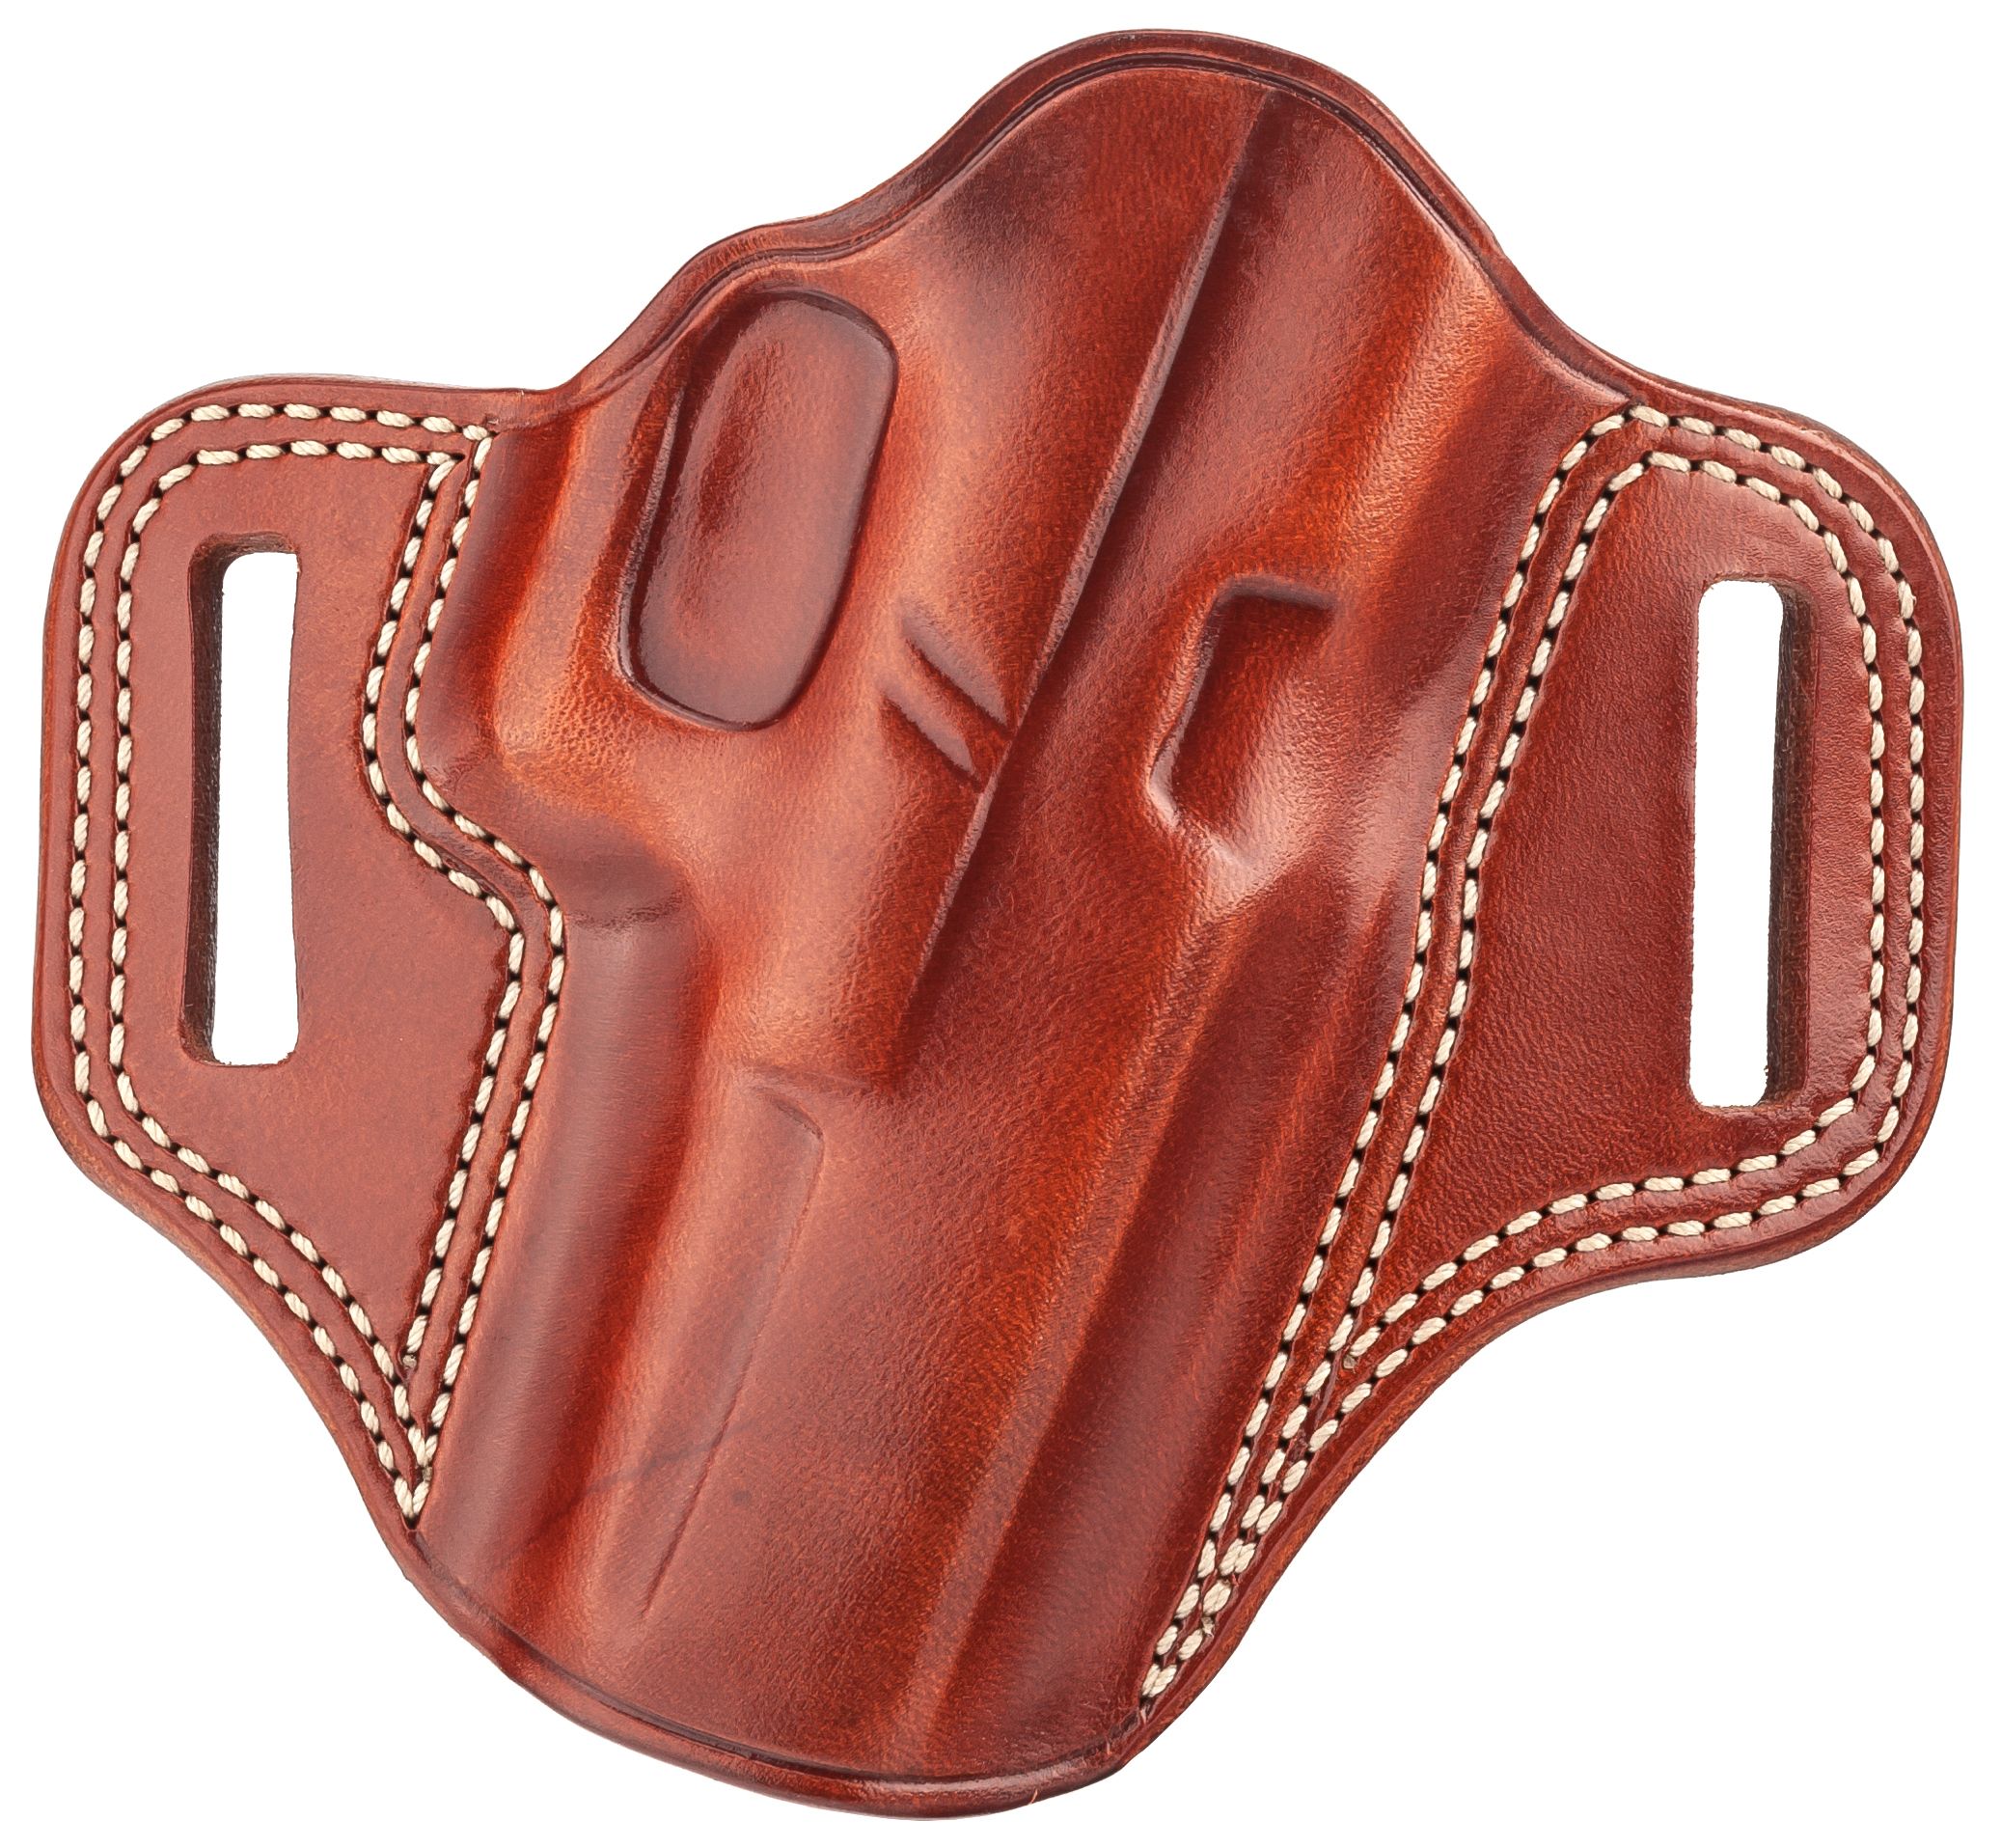 Galco Combat Master Concealment Holster - Right Hand Tan Glock 20/21/37 CM228